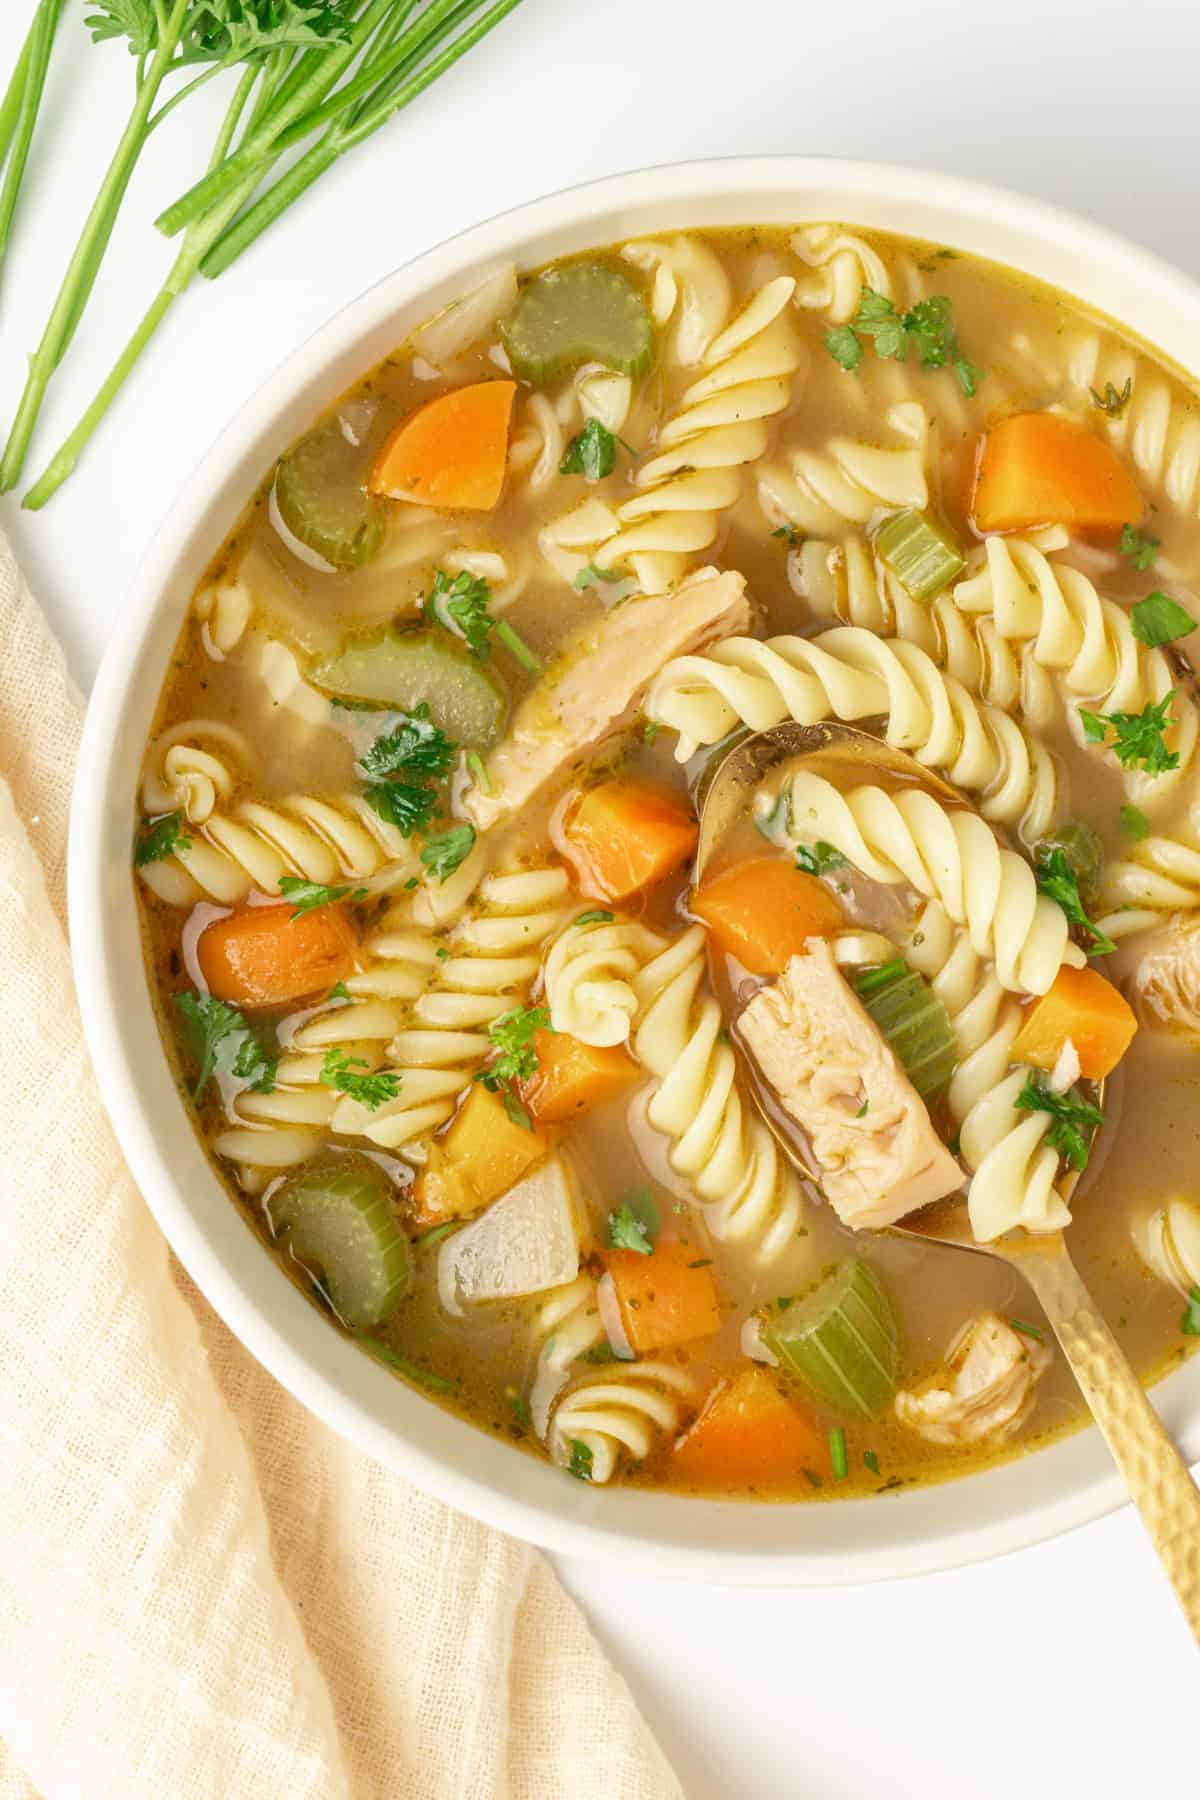 A bowl of vegan chicken noodle soup with a spoon.